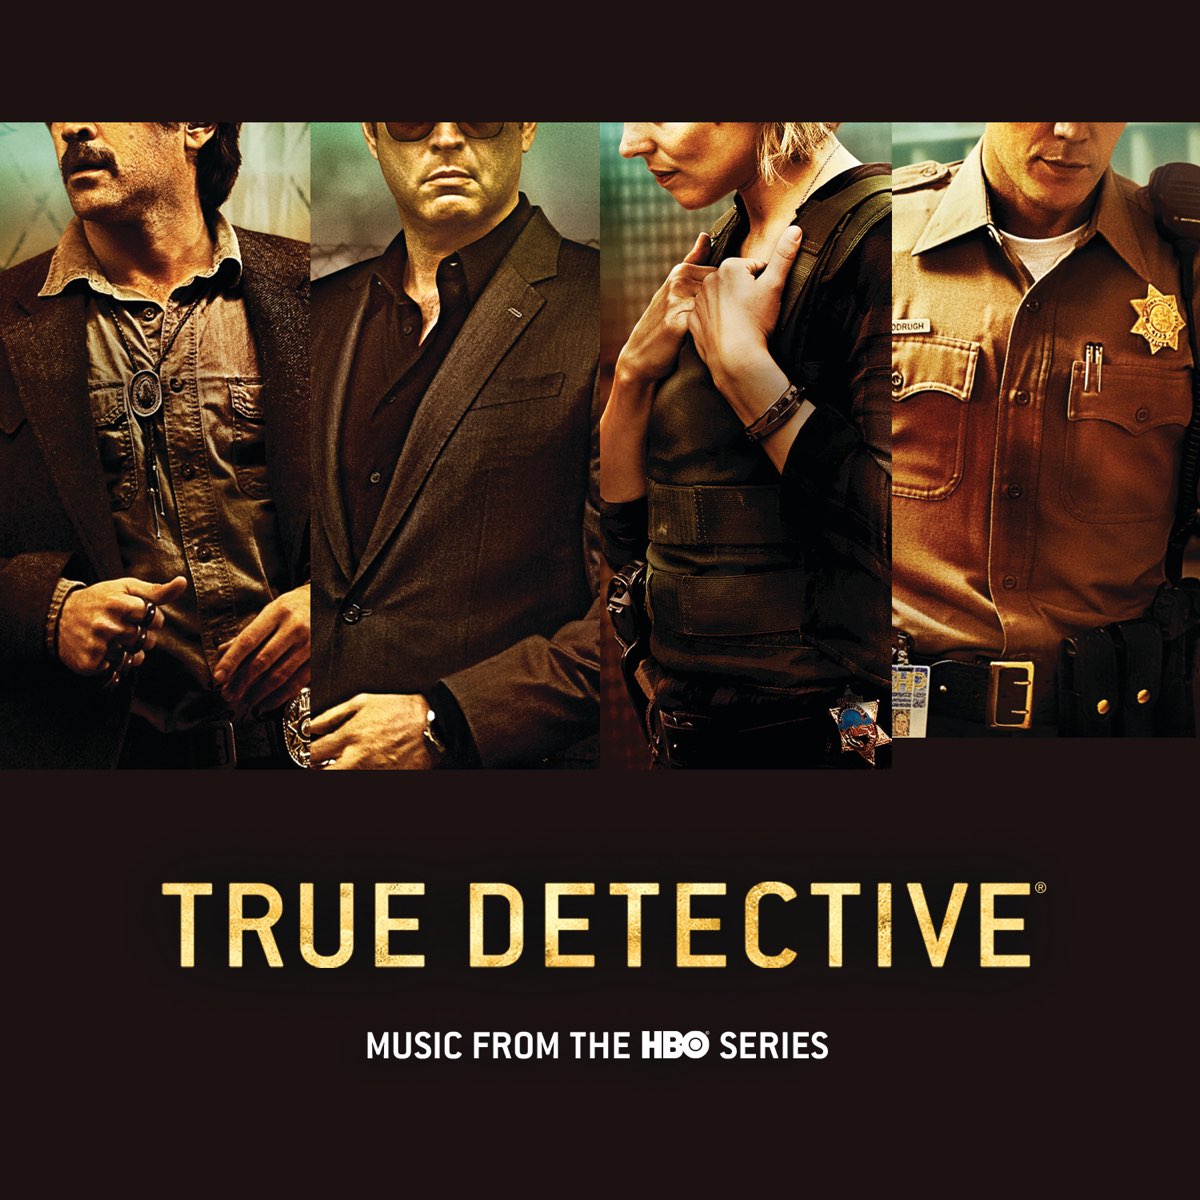 True Detective (Music from the HBO Series) by Various Artists on Apple Music